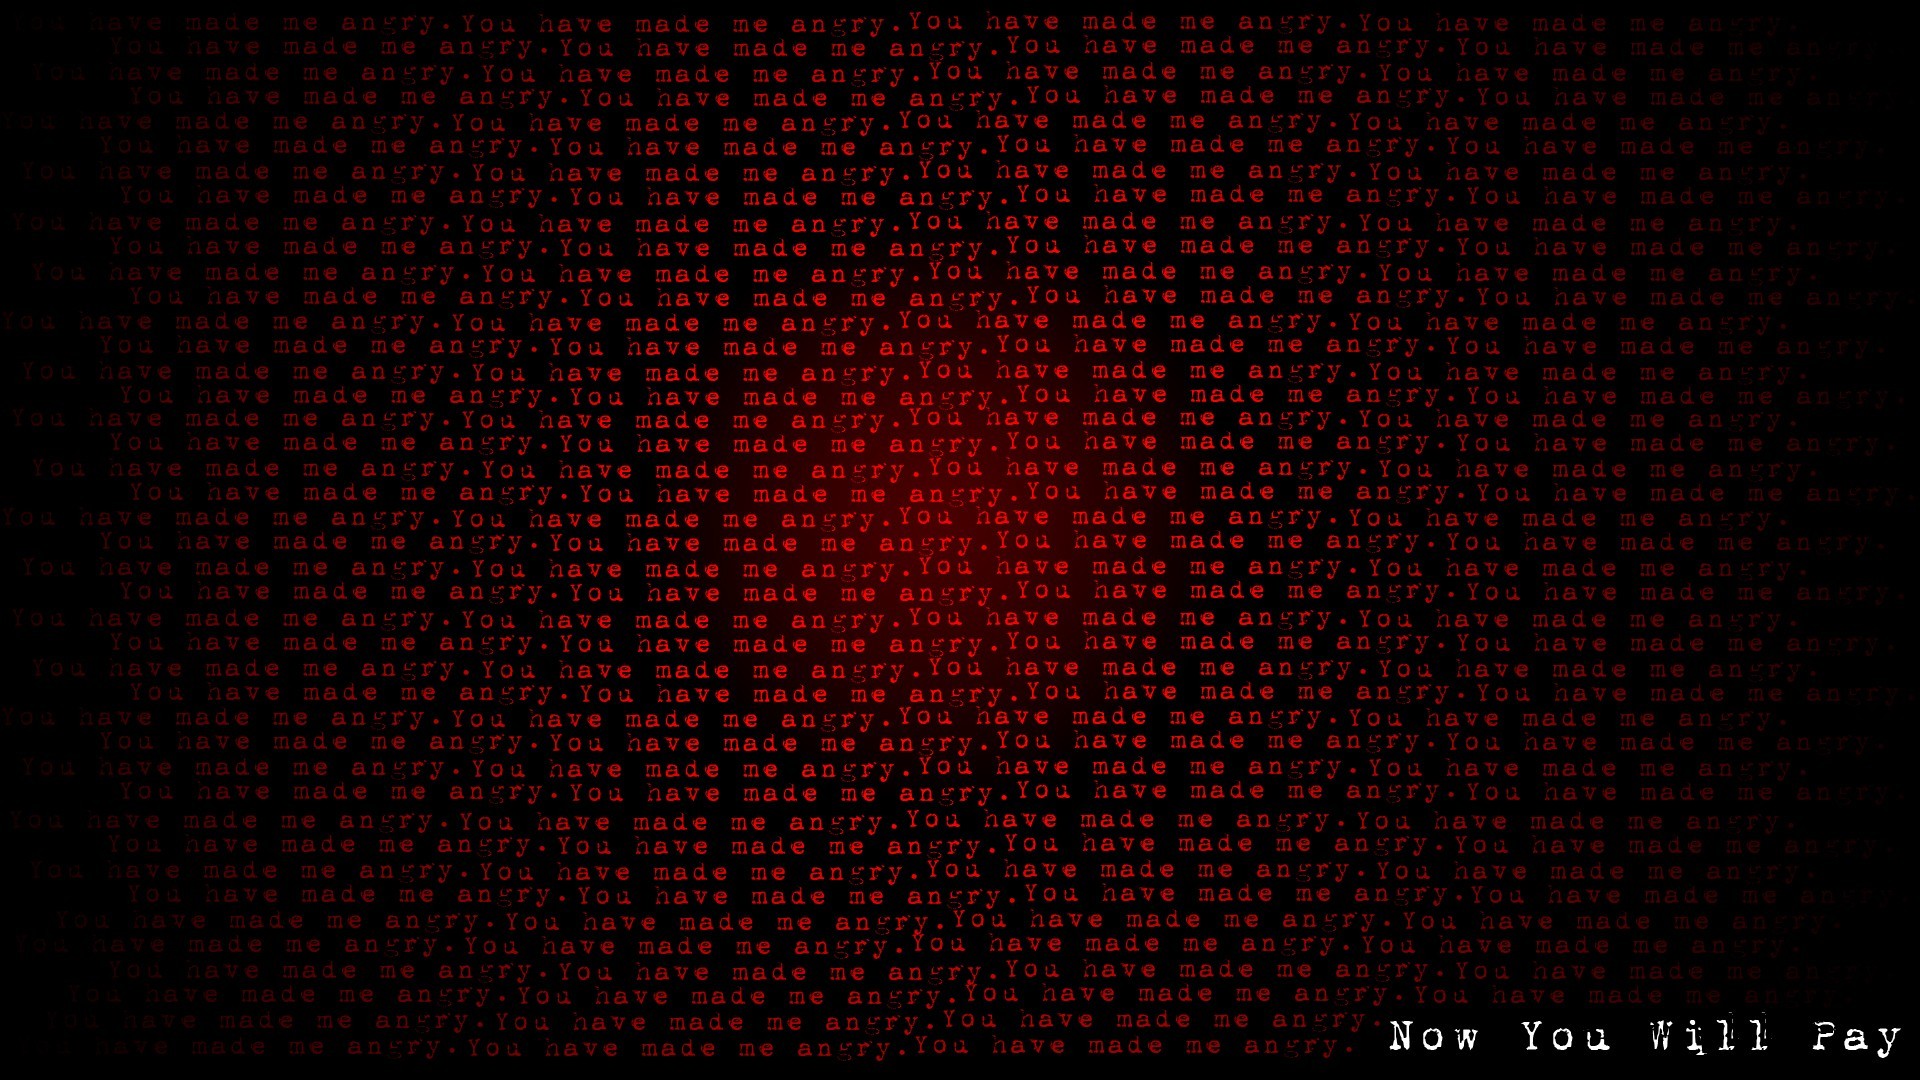 General 1920x1080 cyberspace attack digital art text angry hacking